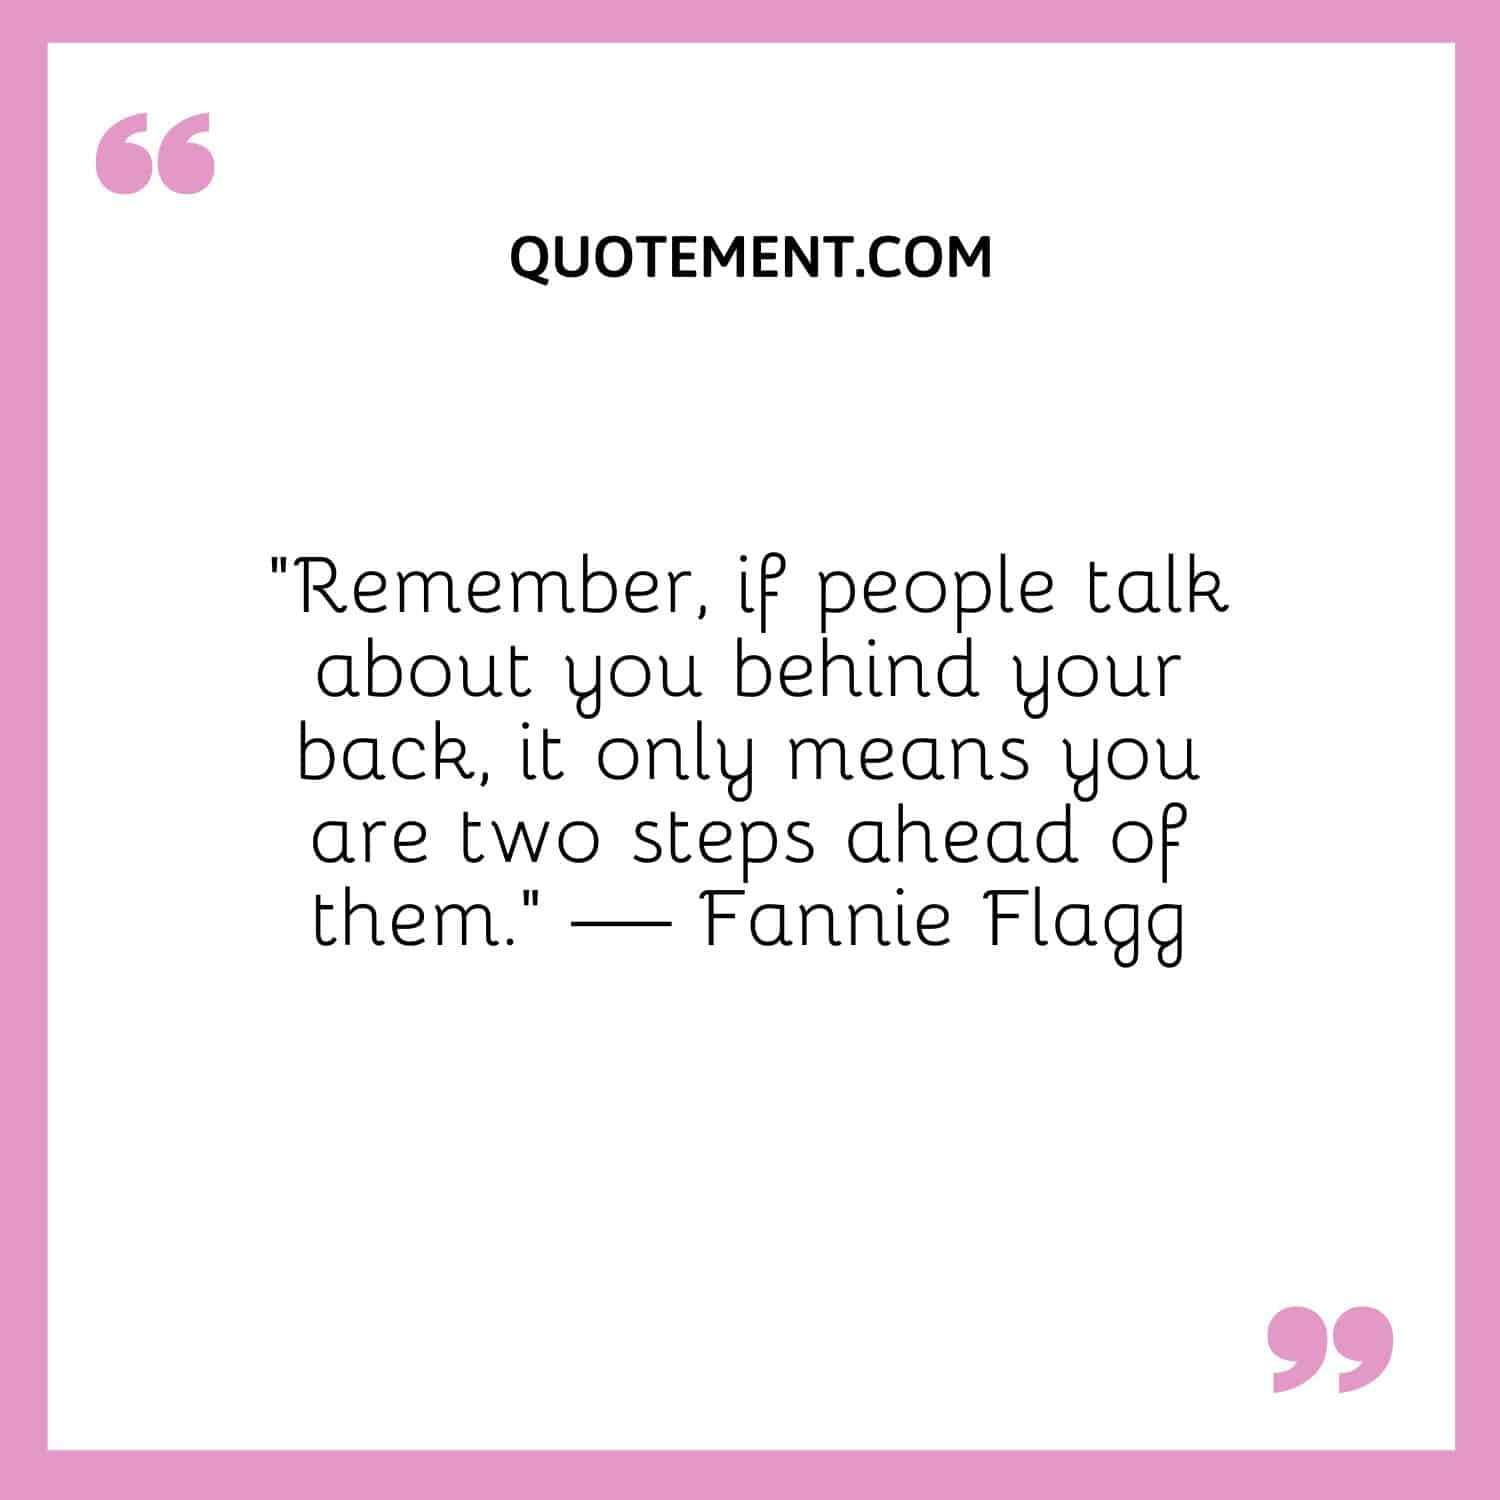 “Remember, if people talk about you behind your back, it only means you are two steps ahead of them.” — Fannie Flagg